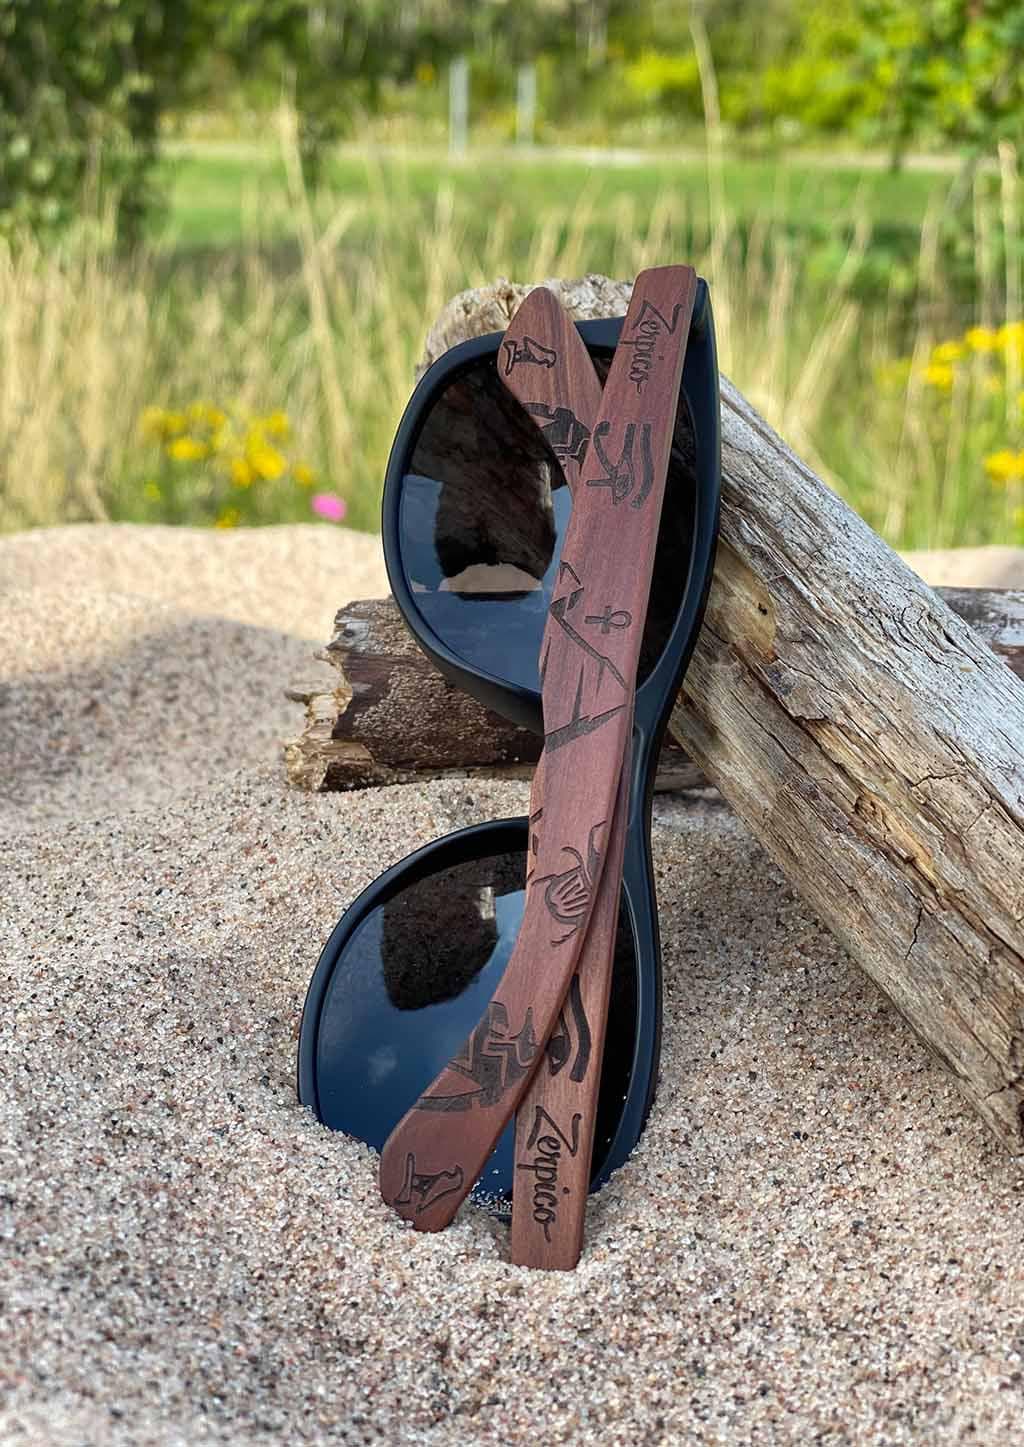 Our wooden engraved sunglasses with a feel from ancient lands.